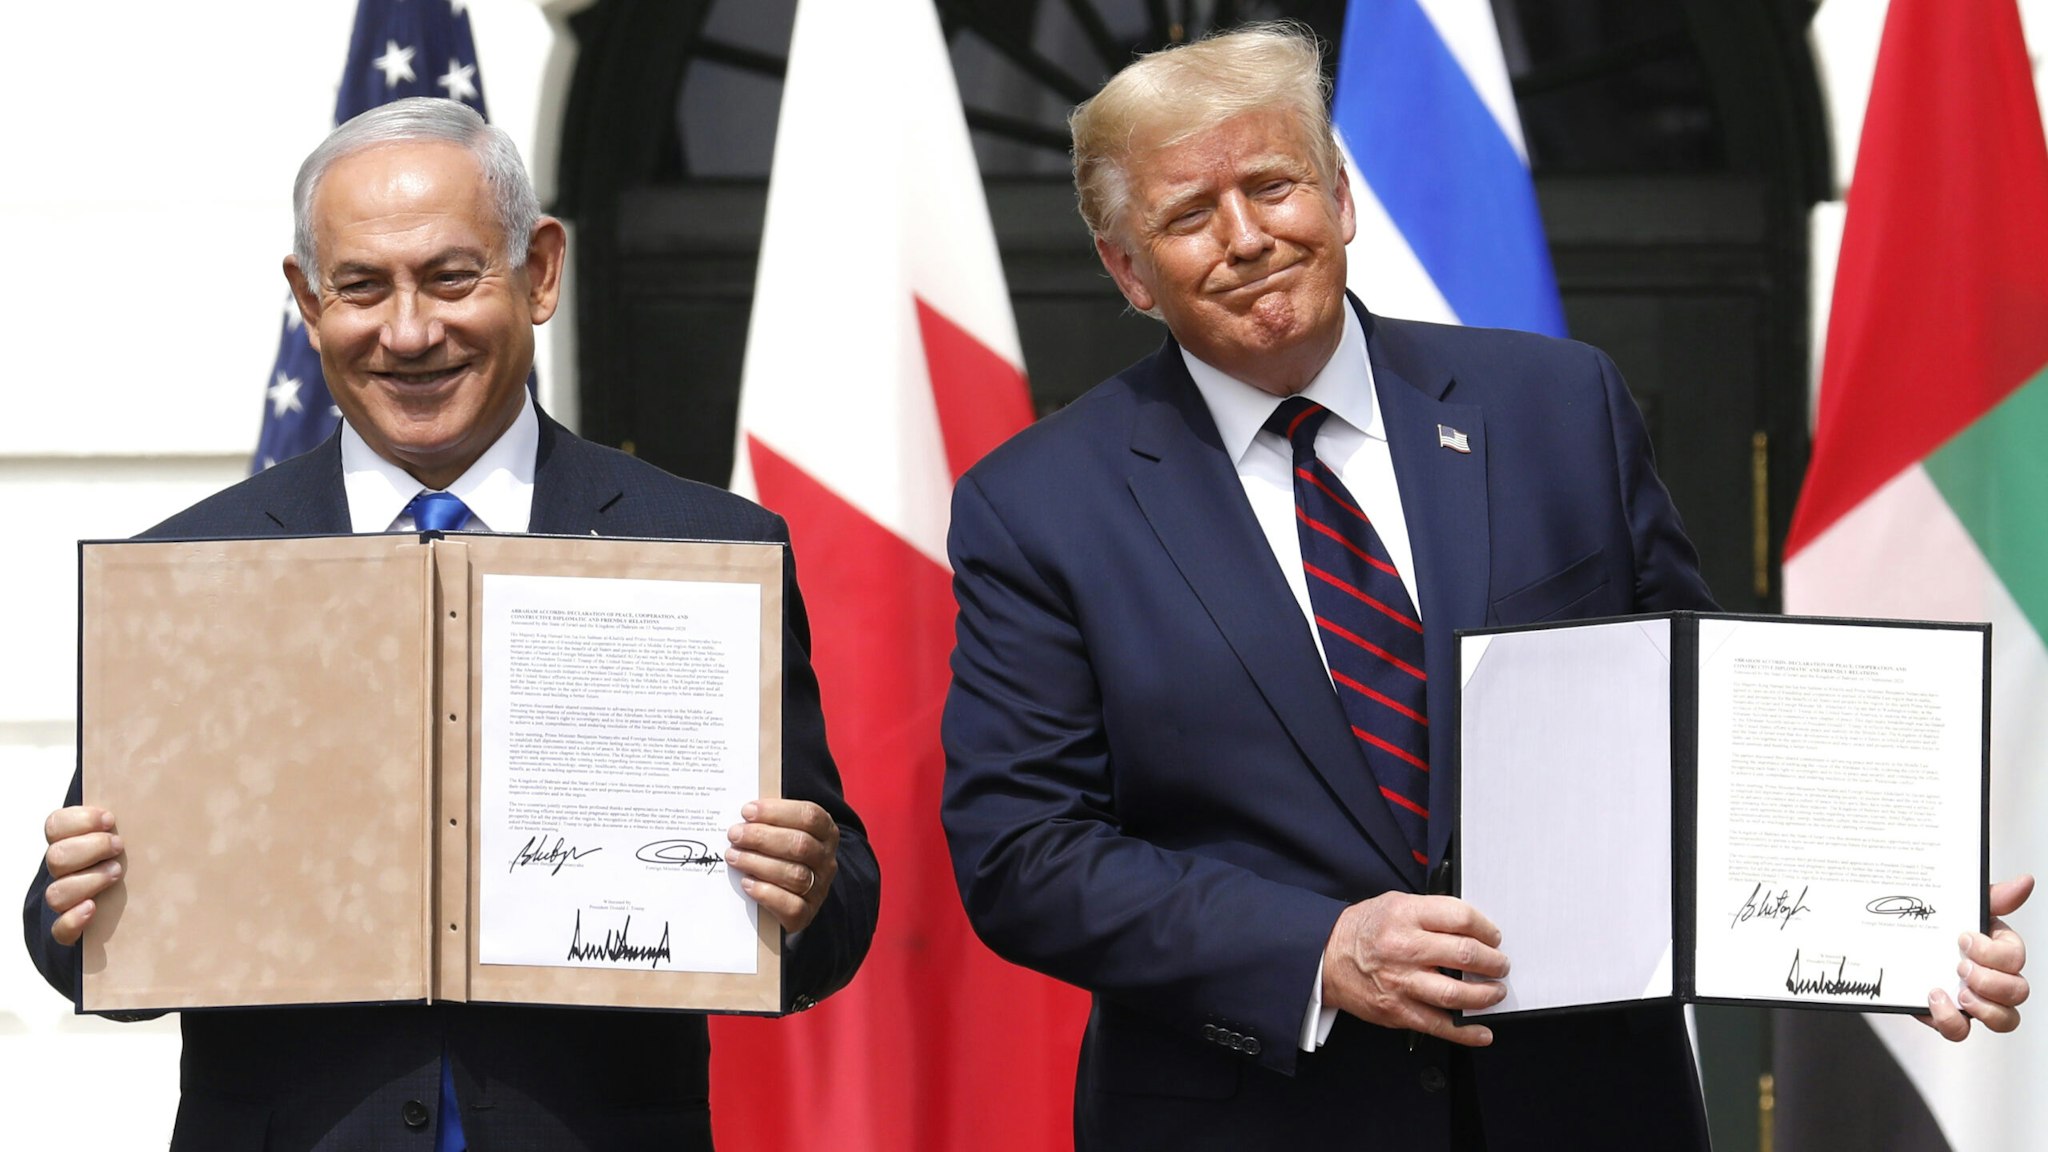 U.S. President Donald Trump and Benjamin Netanyahu, Israel's prime minister, left, hold signed documents during an Abraham Accords signing ceremony event on the South Lawn of the White House in Washington, D.C., U.S., on Tuesday, Sept. 15, 2020. The United Arab Emirates and Bahrain signed landmark agreements on Tuesday to move toward establishing normal relations with Israel, setting in motion a potentially historic shift in Mideast politics at a White House ceremony hosted by President Donald Trump.